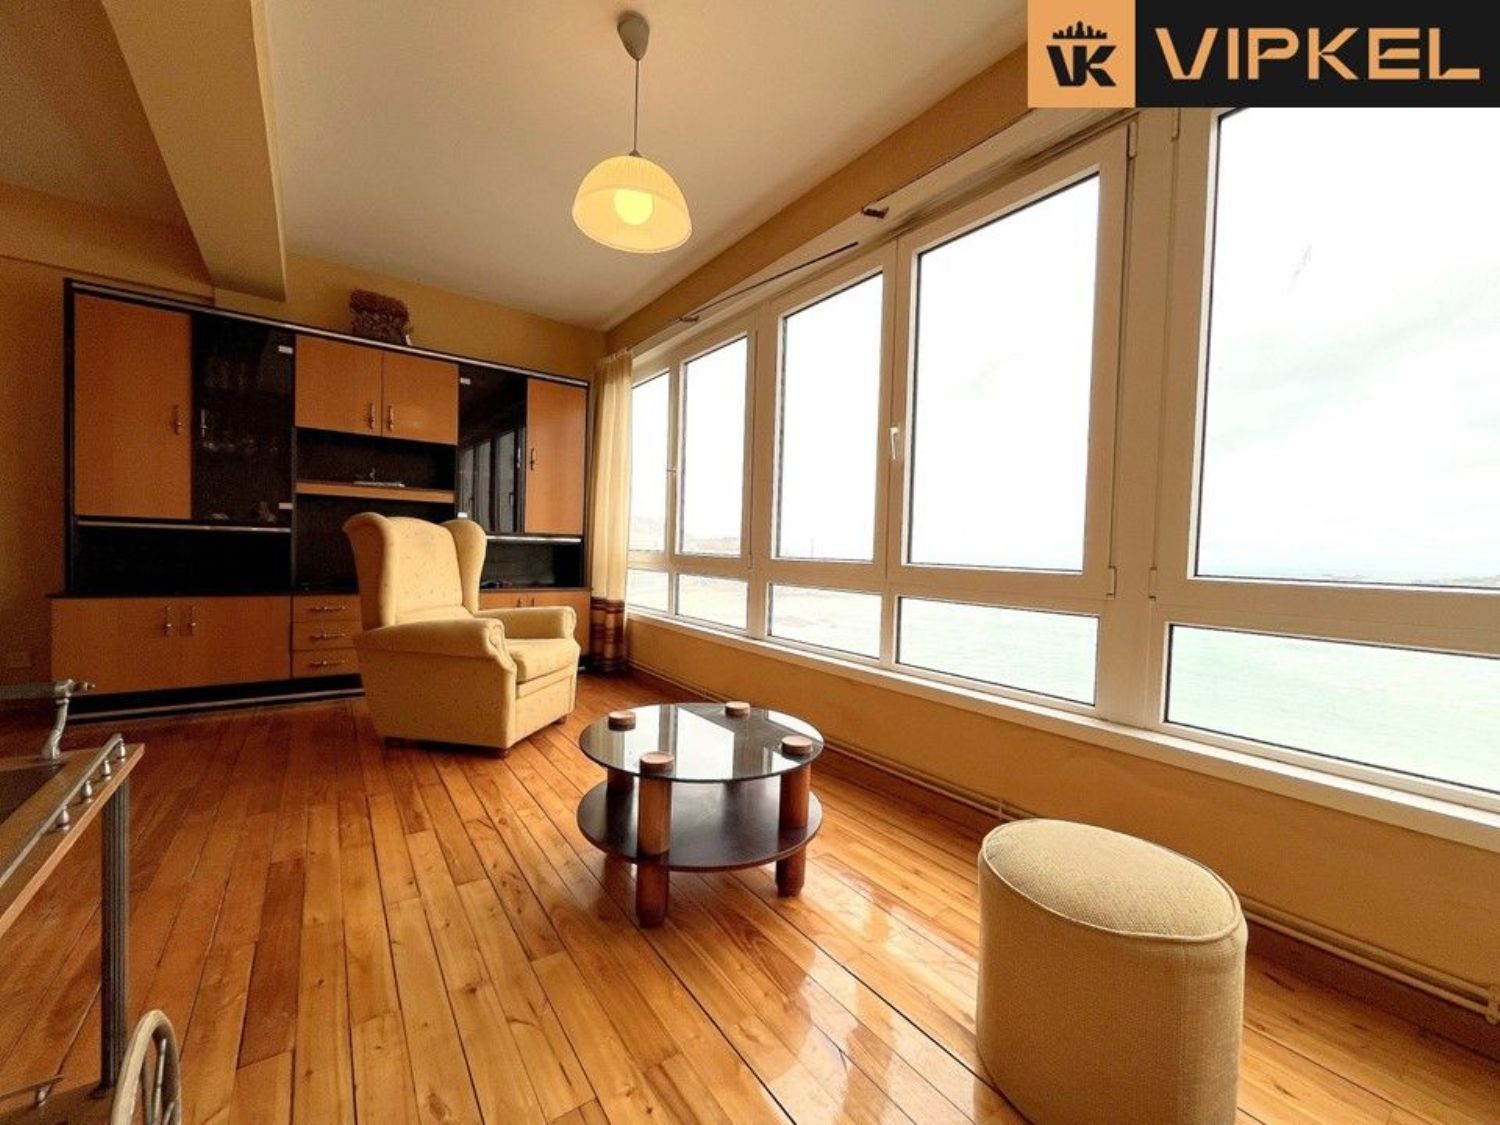 Apartment for sale on the seafront on Avenida Buenos Aires, in A Coruña